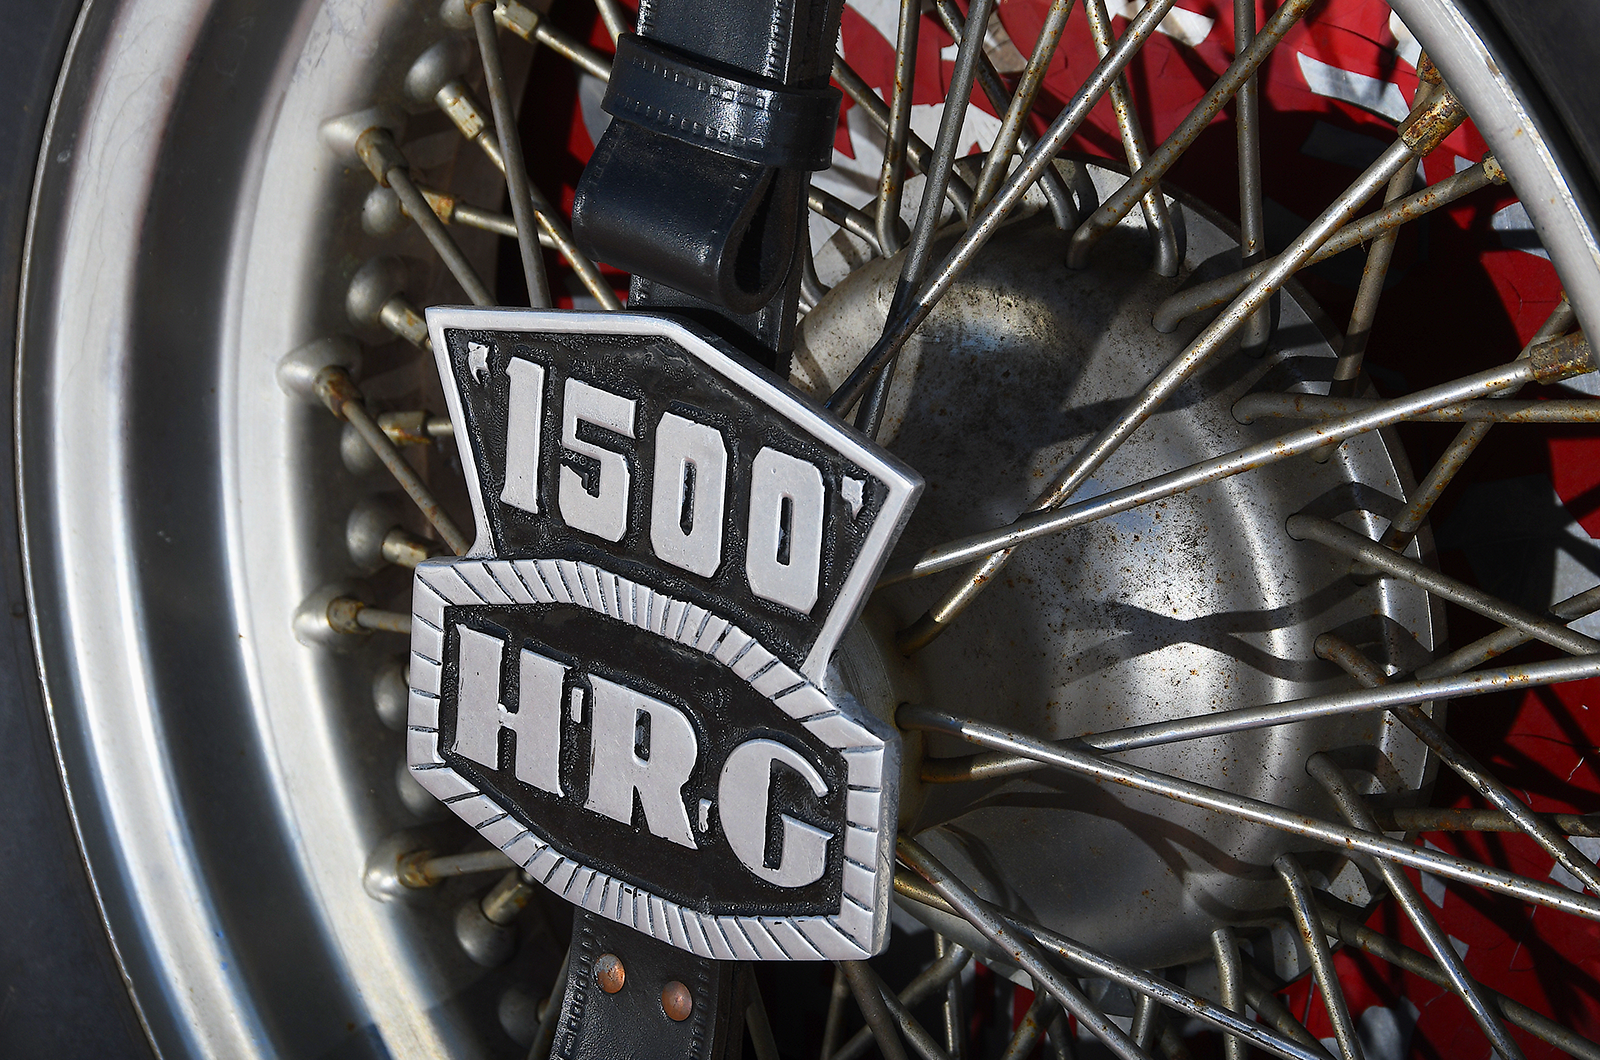 Classic & Sports Car – The HRG 1500 that has finally come full circle